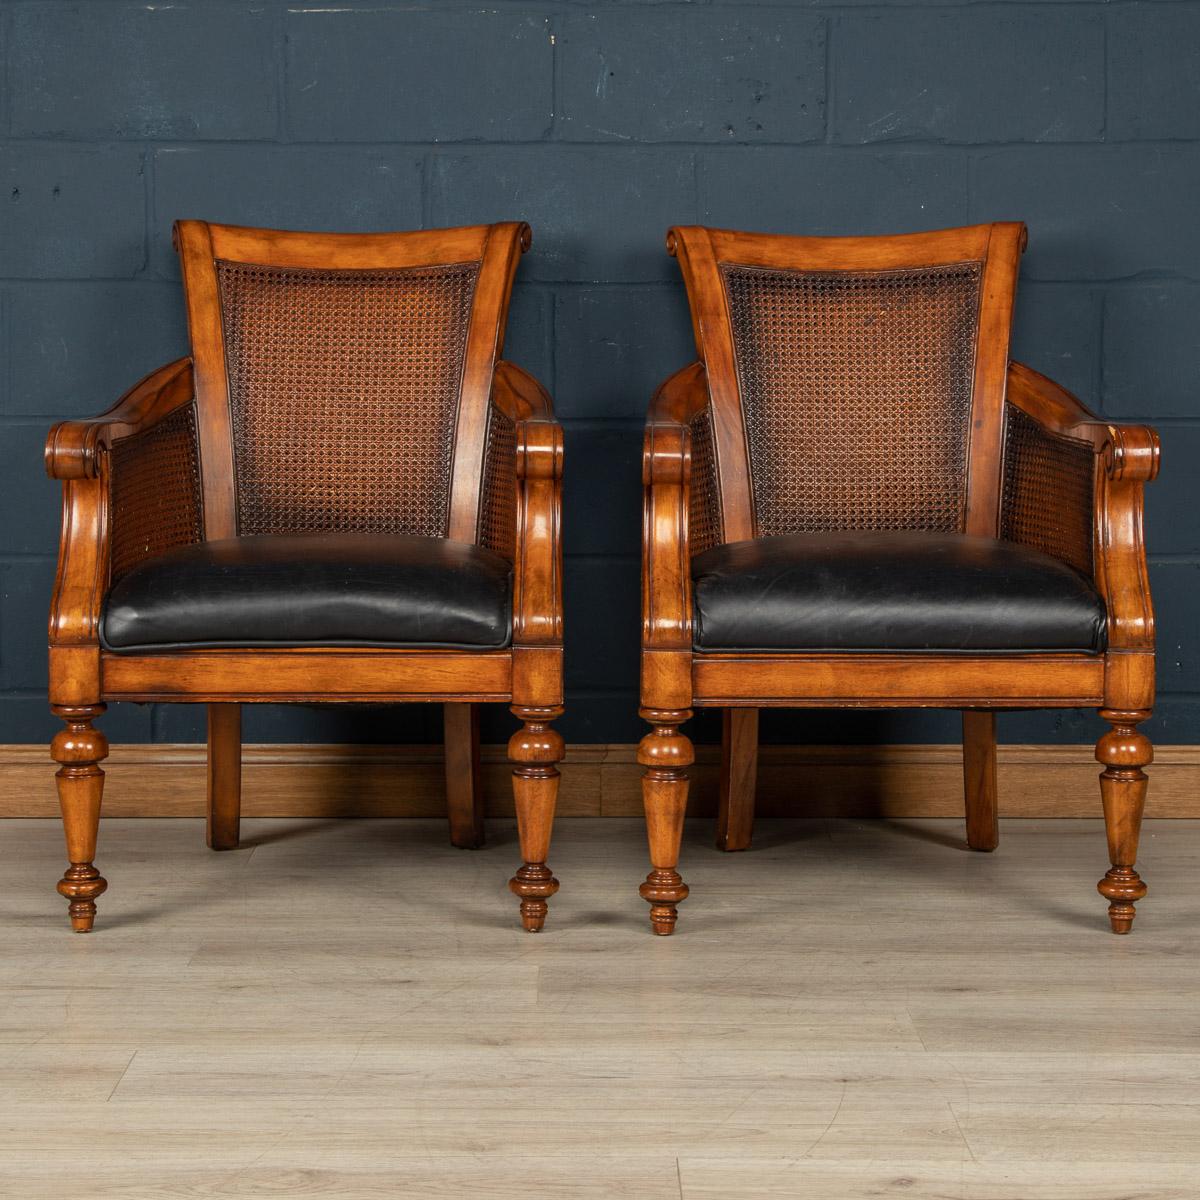 A very elegant pair of armchairs, with a varnished hardwood frame (probably oak or beech), padded leather seating and rattan rear and side panels. A lovely item of furniture manufactured in the classical manner, they are a striking and imposing pair